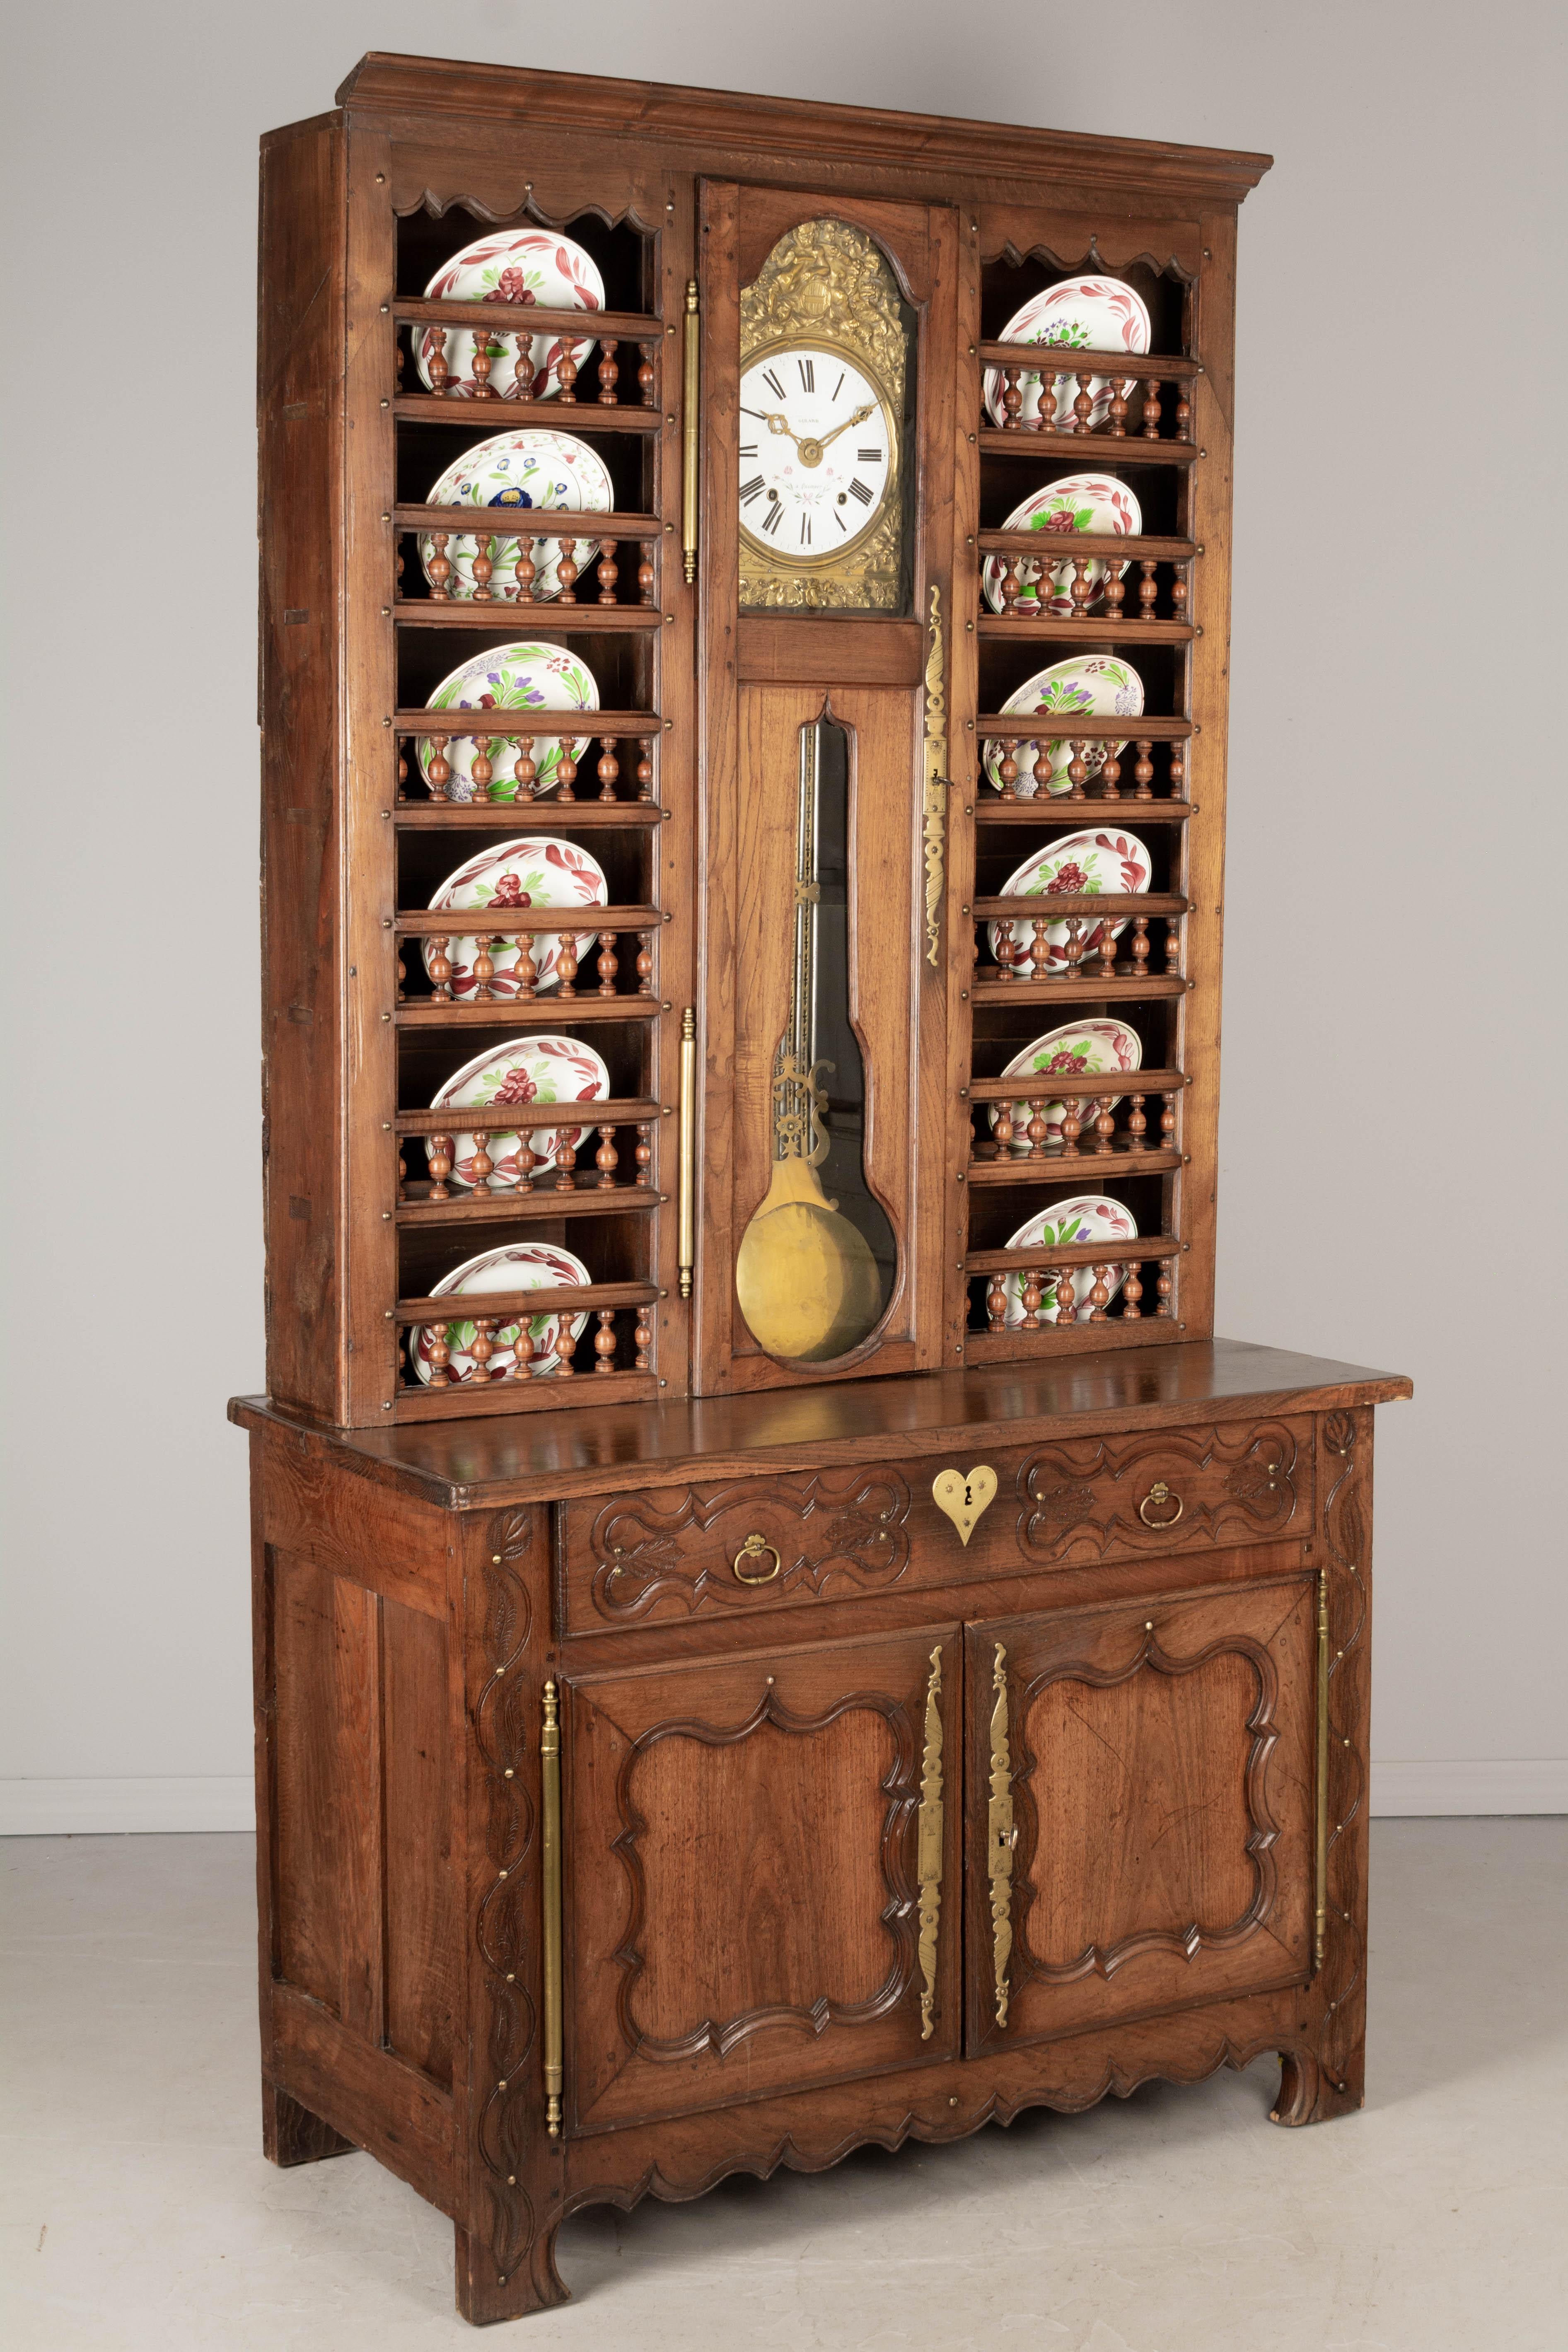 A 19th Century Country French vaisselier, or china hutch, from Brittany made of solid chestnut and in two parts. The top has a tall plate rack with two sets of six shelves with turned spindle gallery flanking a glass cased clock. Clock has an enamel